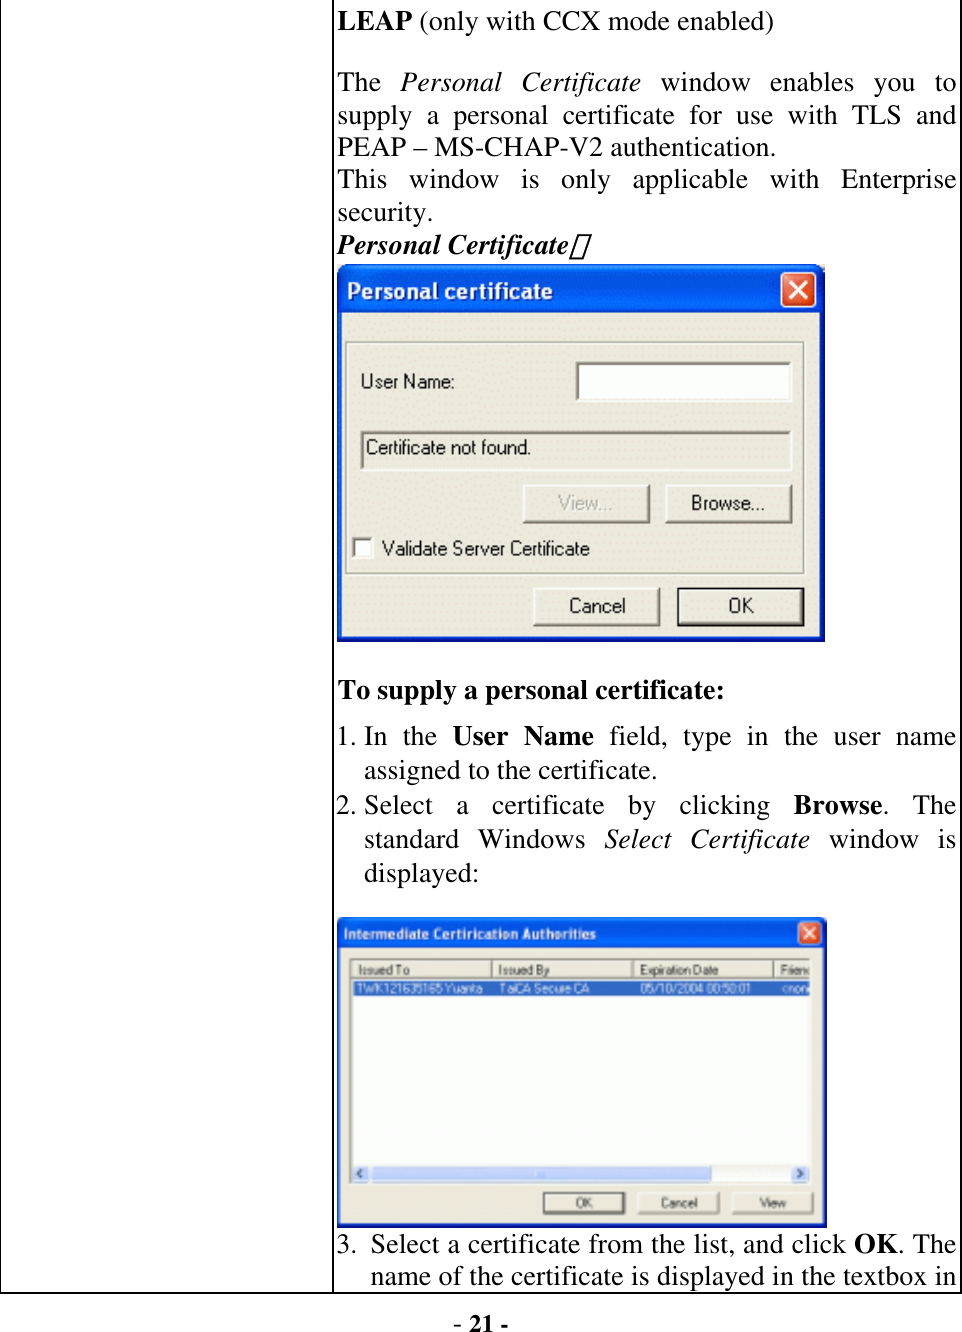  - 21 - LEAP (only with CCX mode enabled)   The  Personal Certificate window enables you to supply a personal certificate for use with TLS and PEAP – MS-CHAP-V2 authentication.   This window is only applicable with Enterprise security. Personal Certificate：   To supply a personal certificate:   1. In  the  User Name field, type in the user name assigned to the certificate.   2. Select a certificate by clicking Browse. The standard Windows Select Certificate window is displayed:   3.  Select a certificate from the list, and click OK. The name of the certificate is displayed in the textbox in 